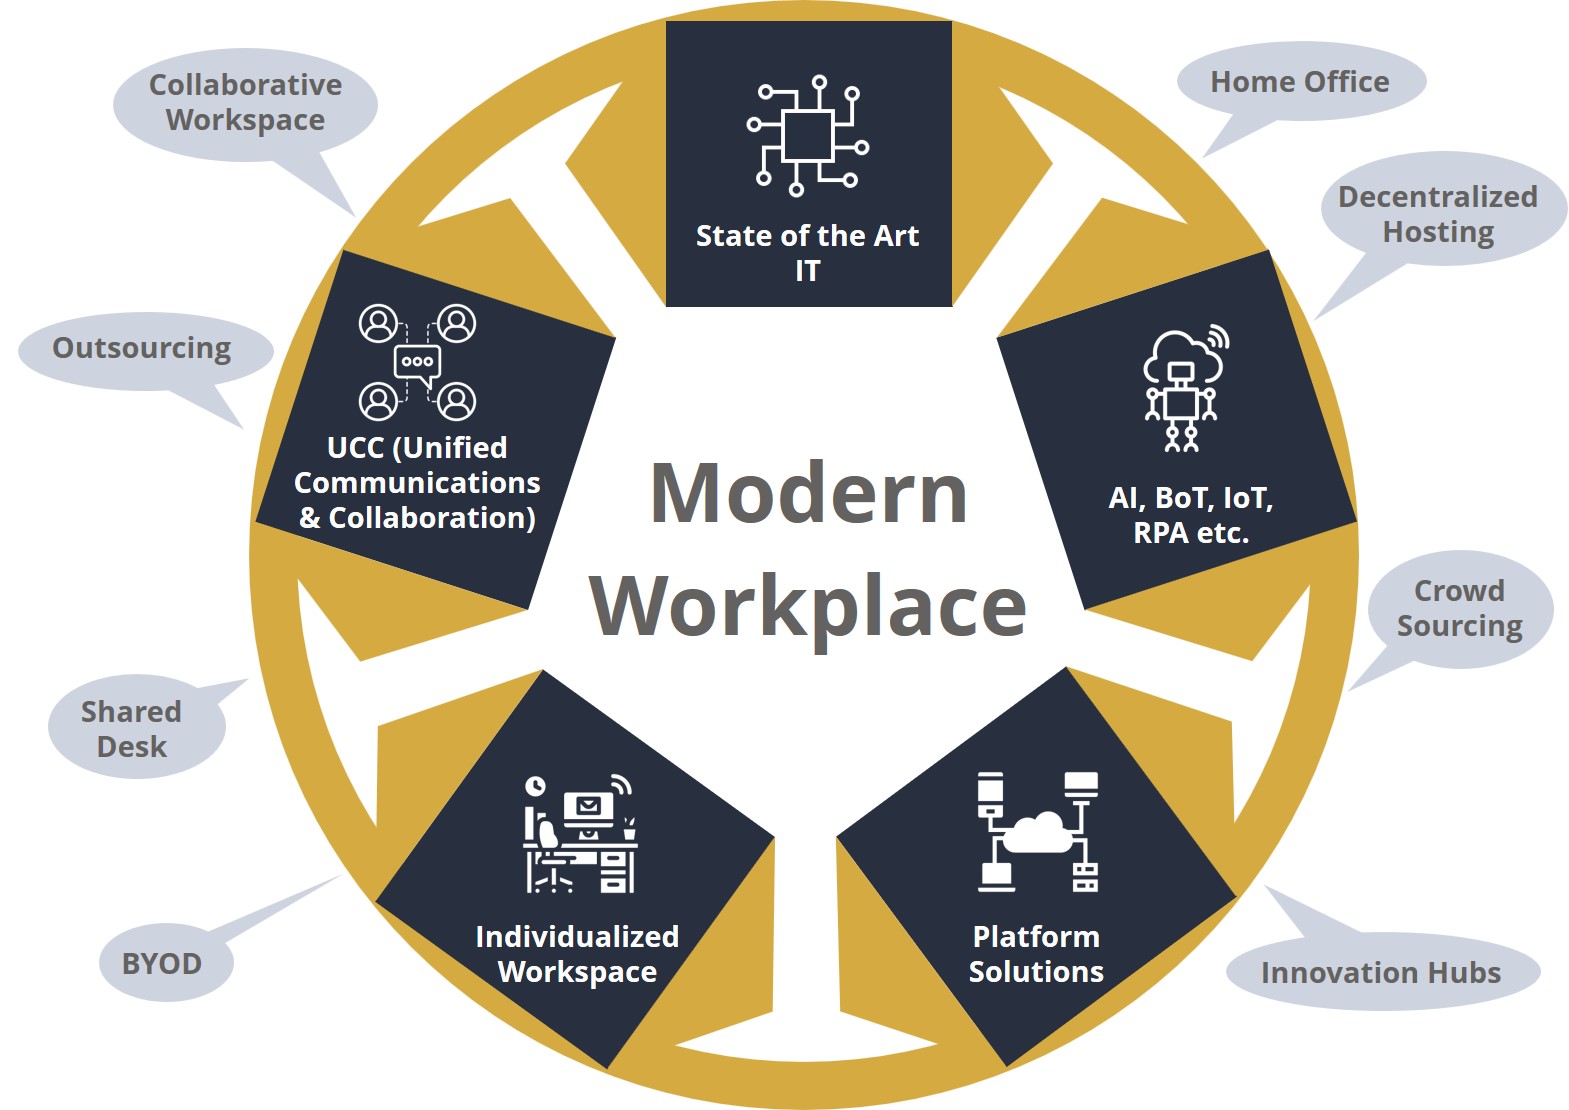 Presentation of the Workplace model with the different orientations